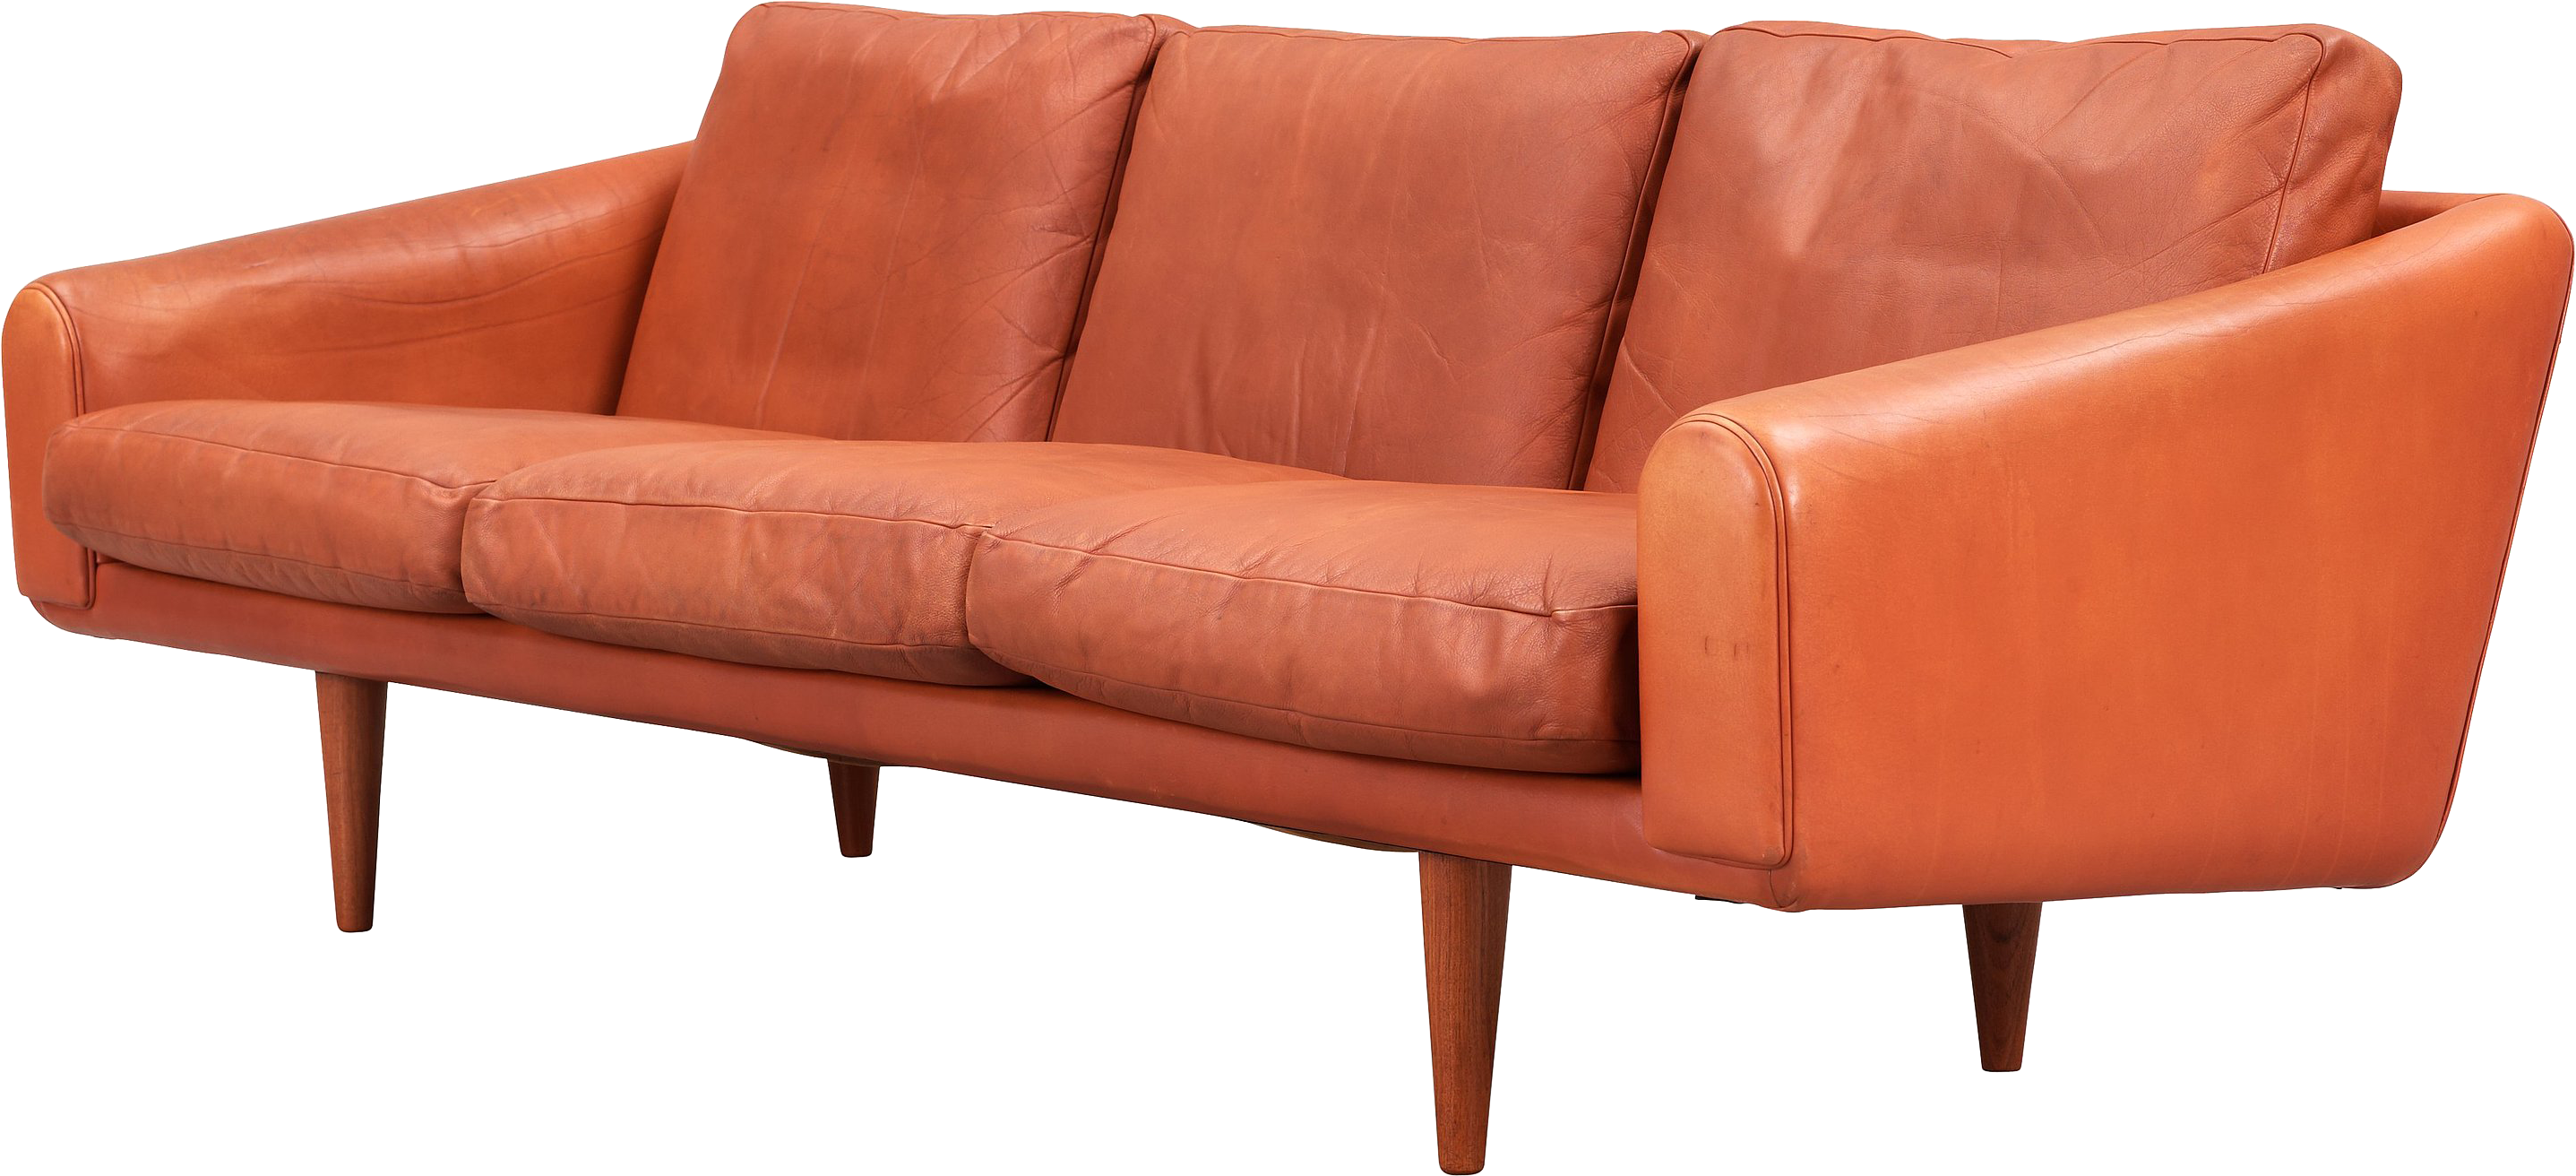 Orange Couch PNG HD Quality